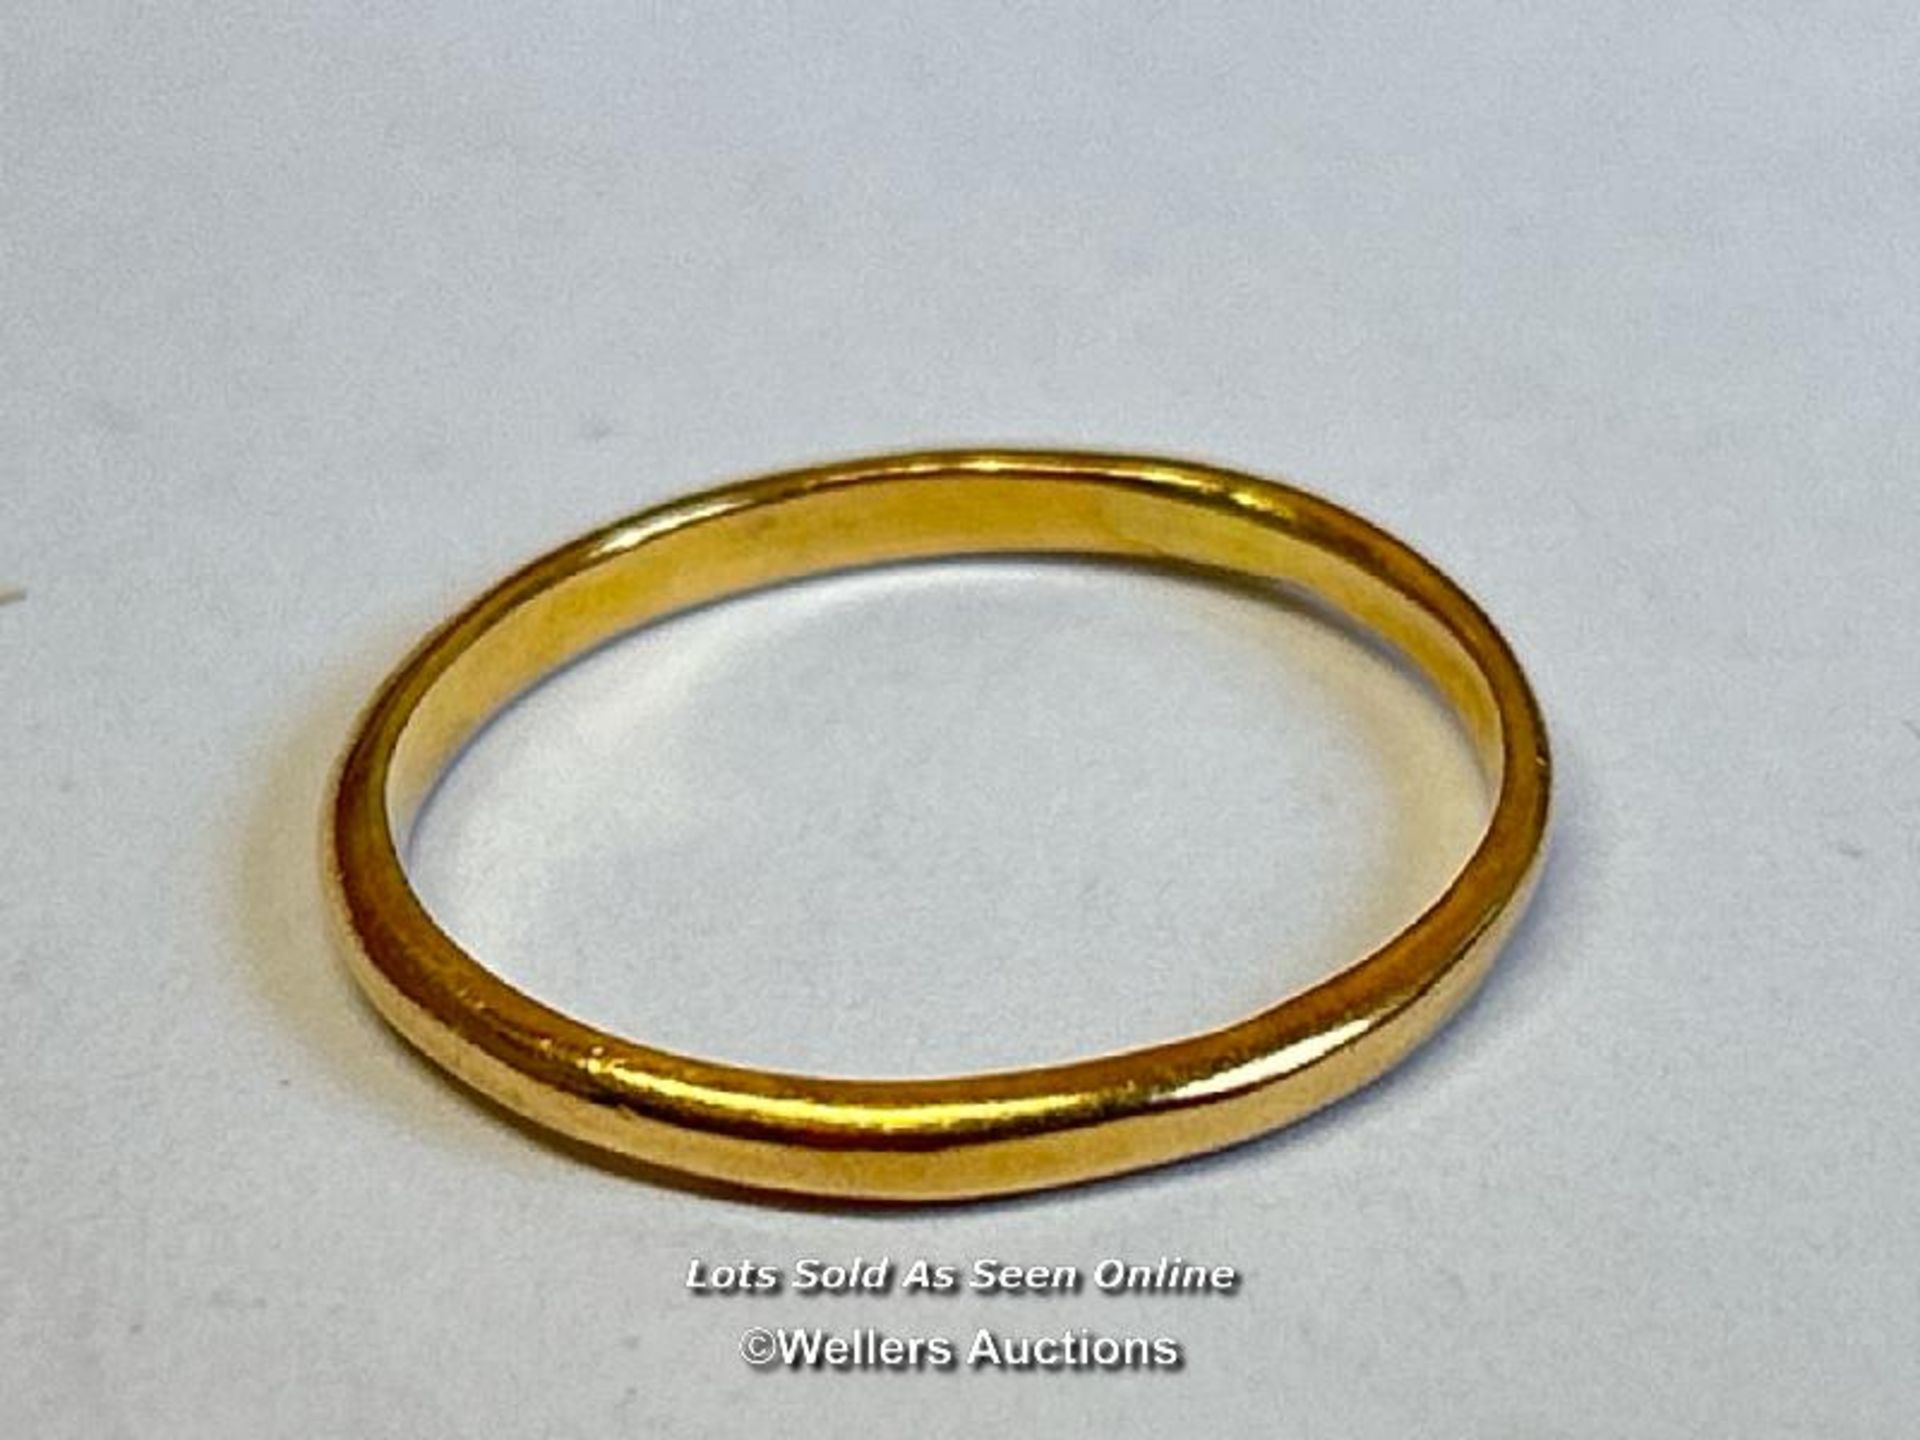 Wedding band, hallmarked rubbed, acid tests as 22ct gold, ring size Q. Gross weight 2.32g